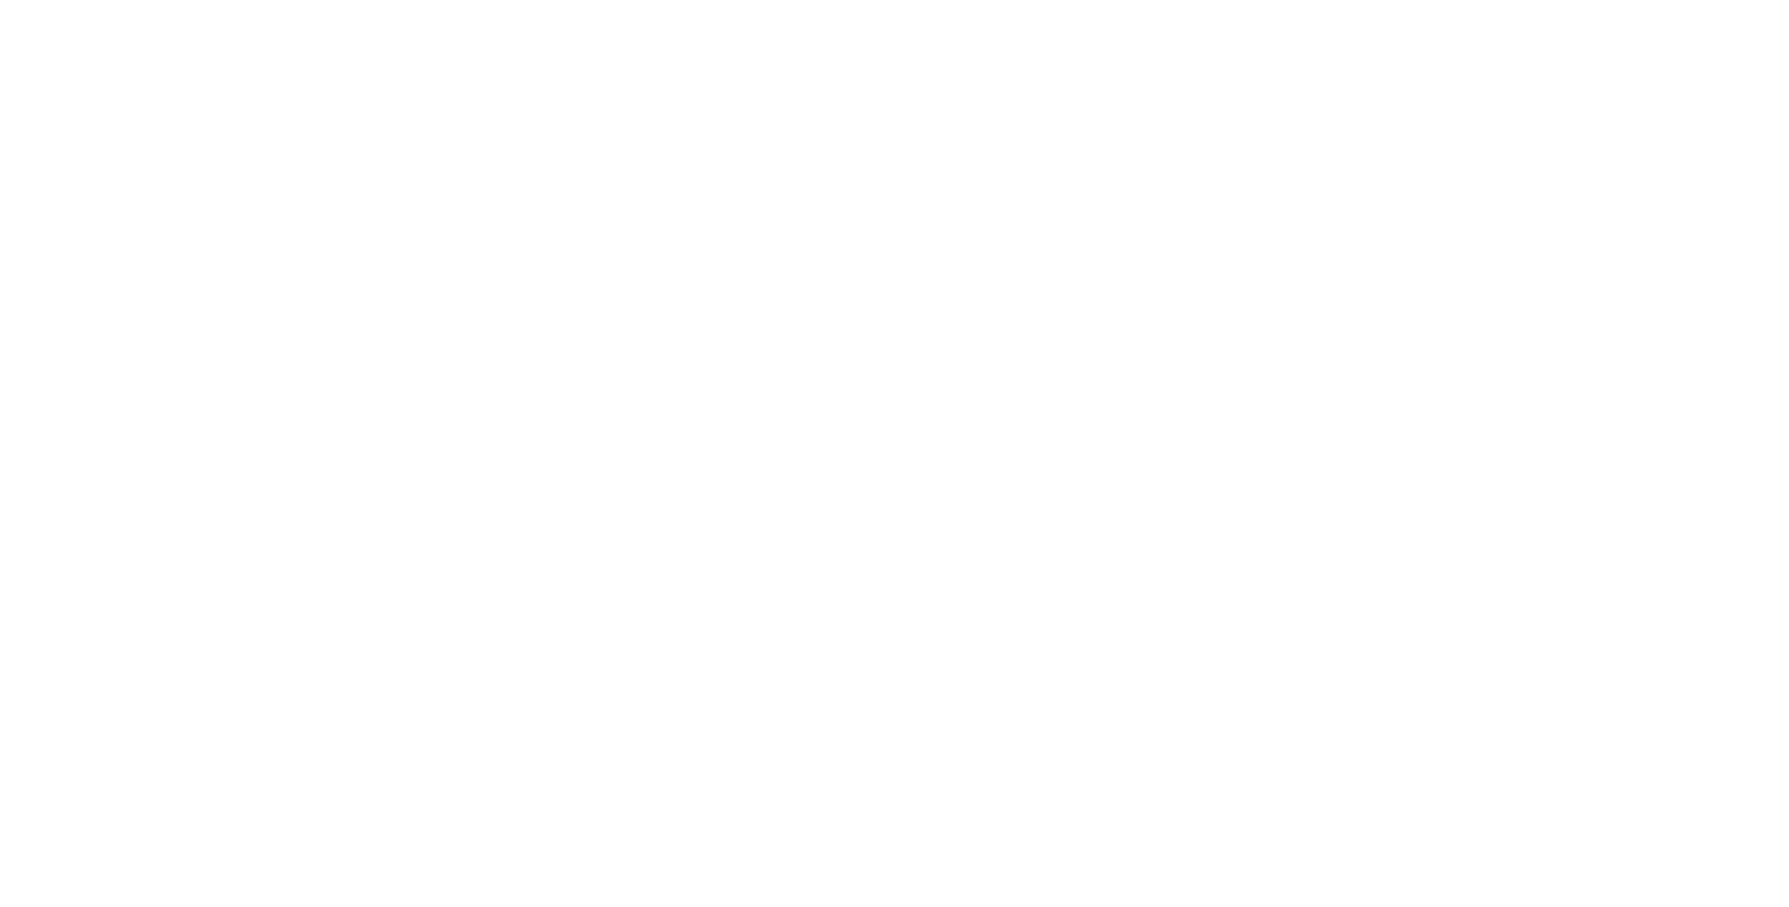 The logo picture of REAN FOUNDATION in white